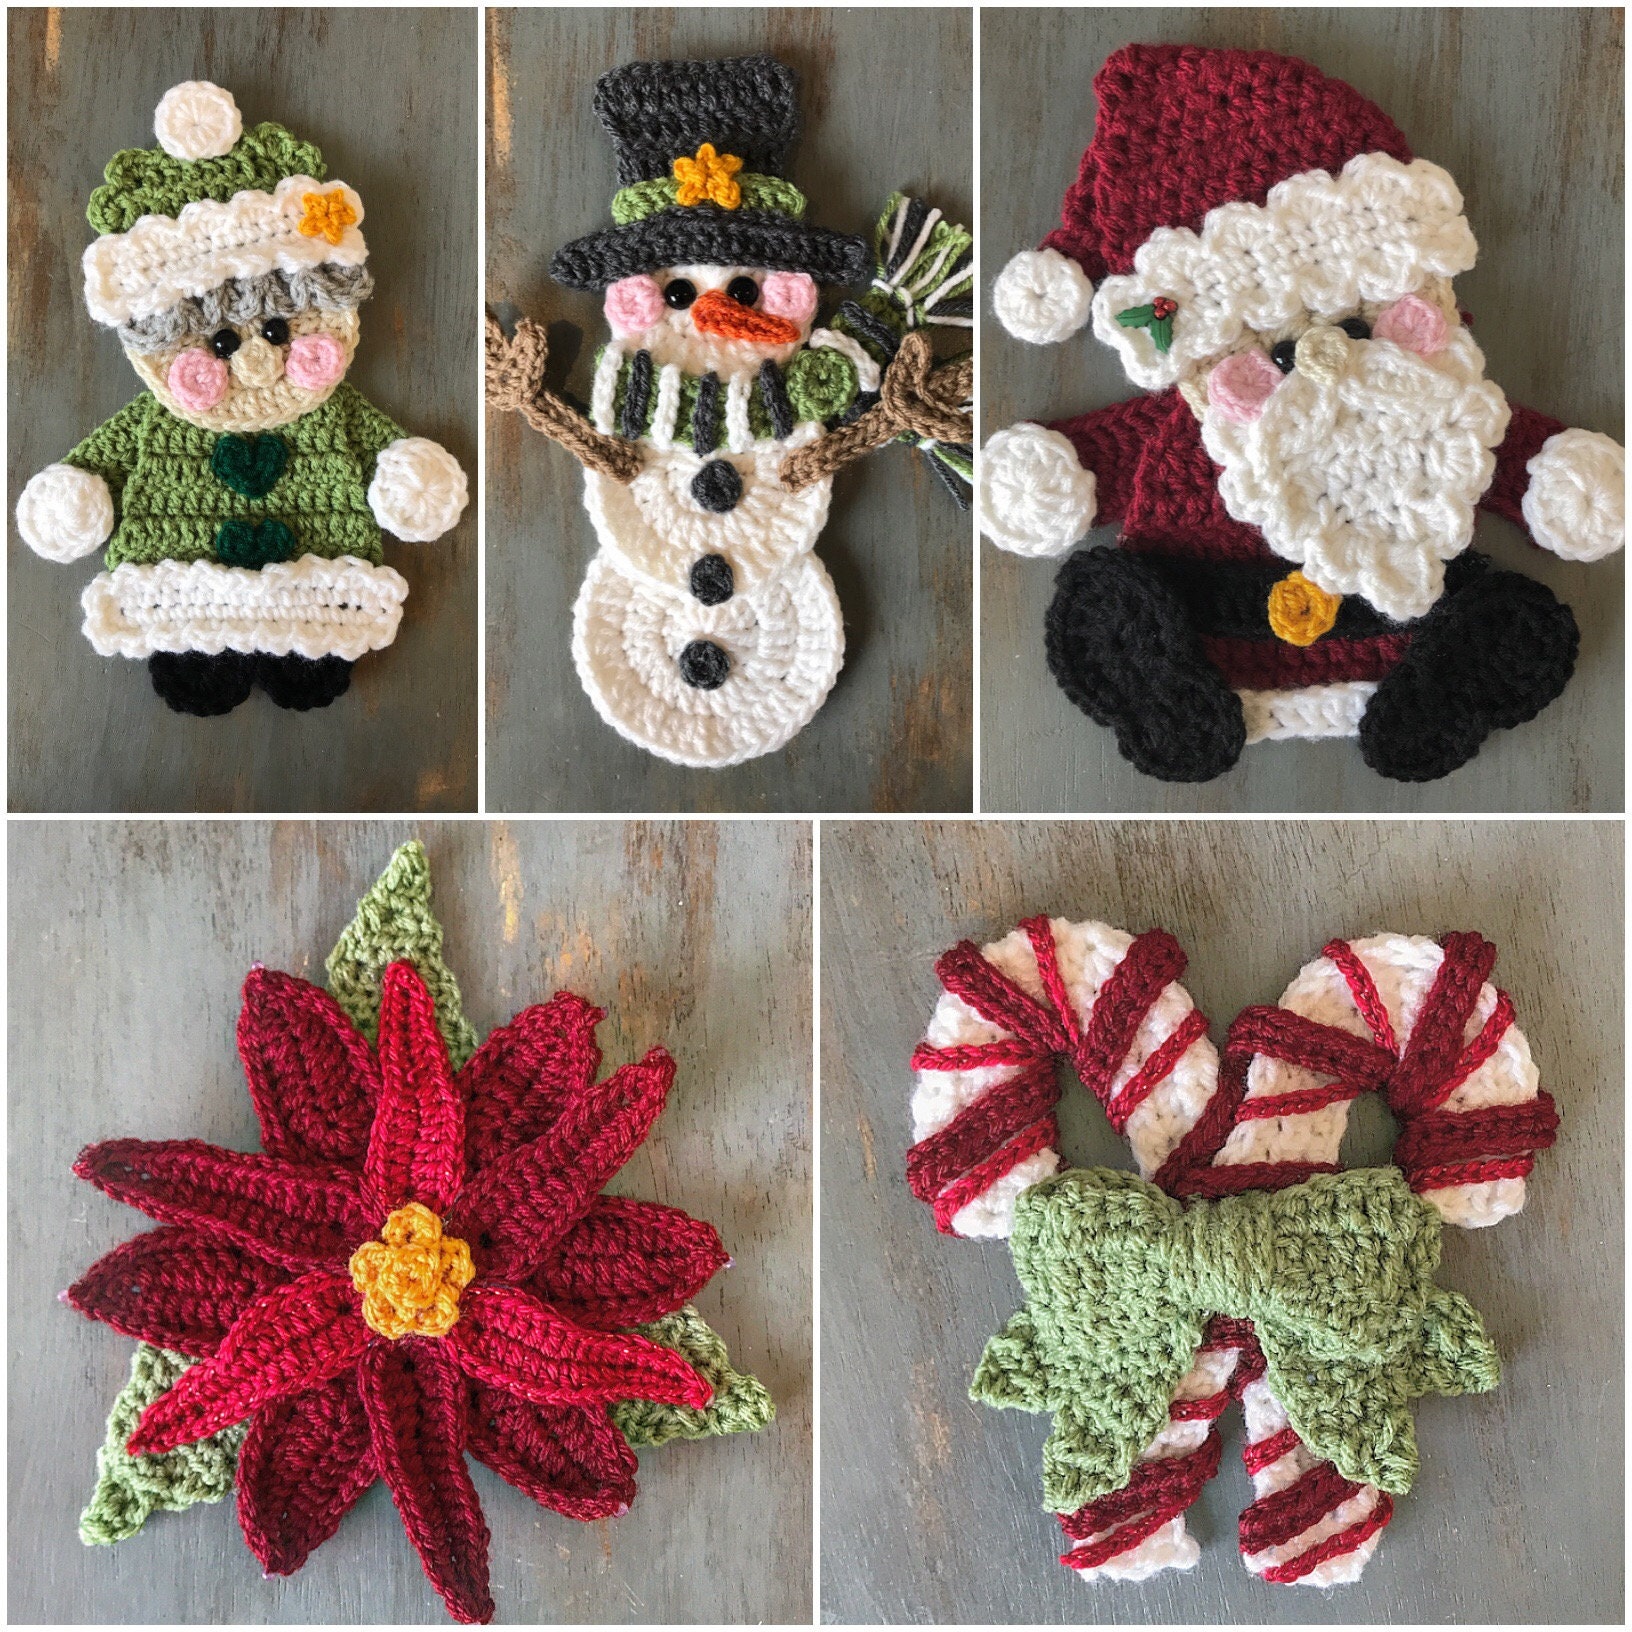 handmade-by-camelia-pattern-three-ornaments-crocheted-for-christmas